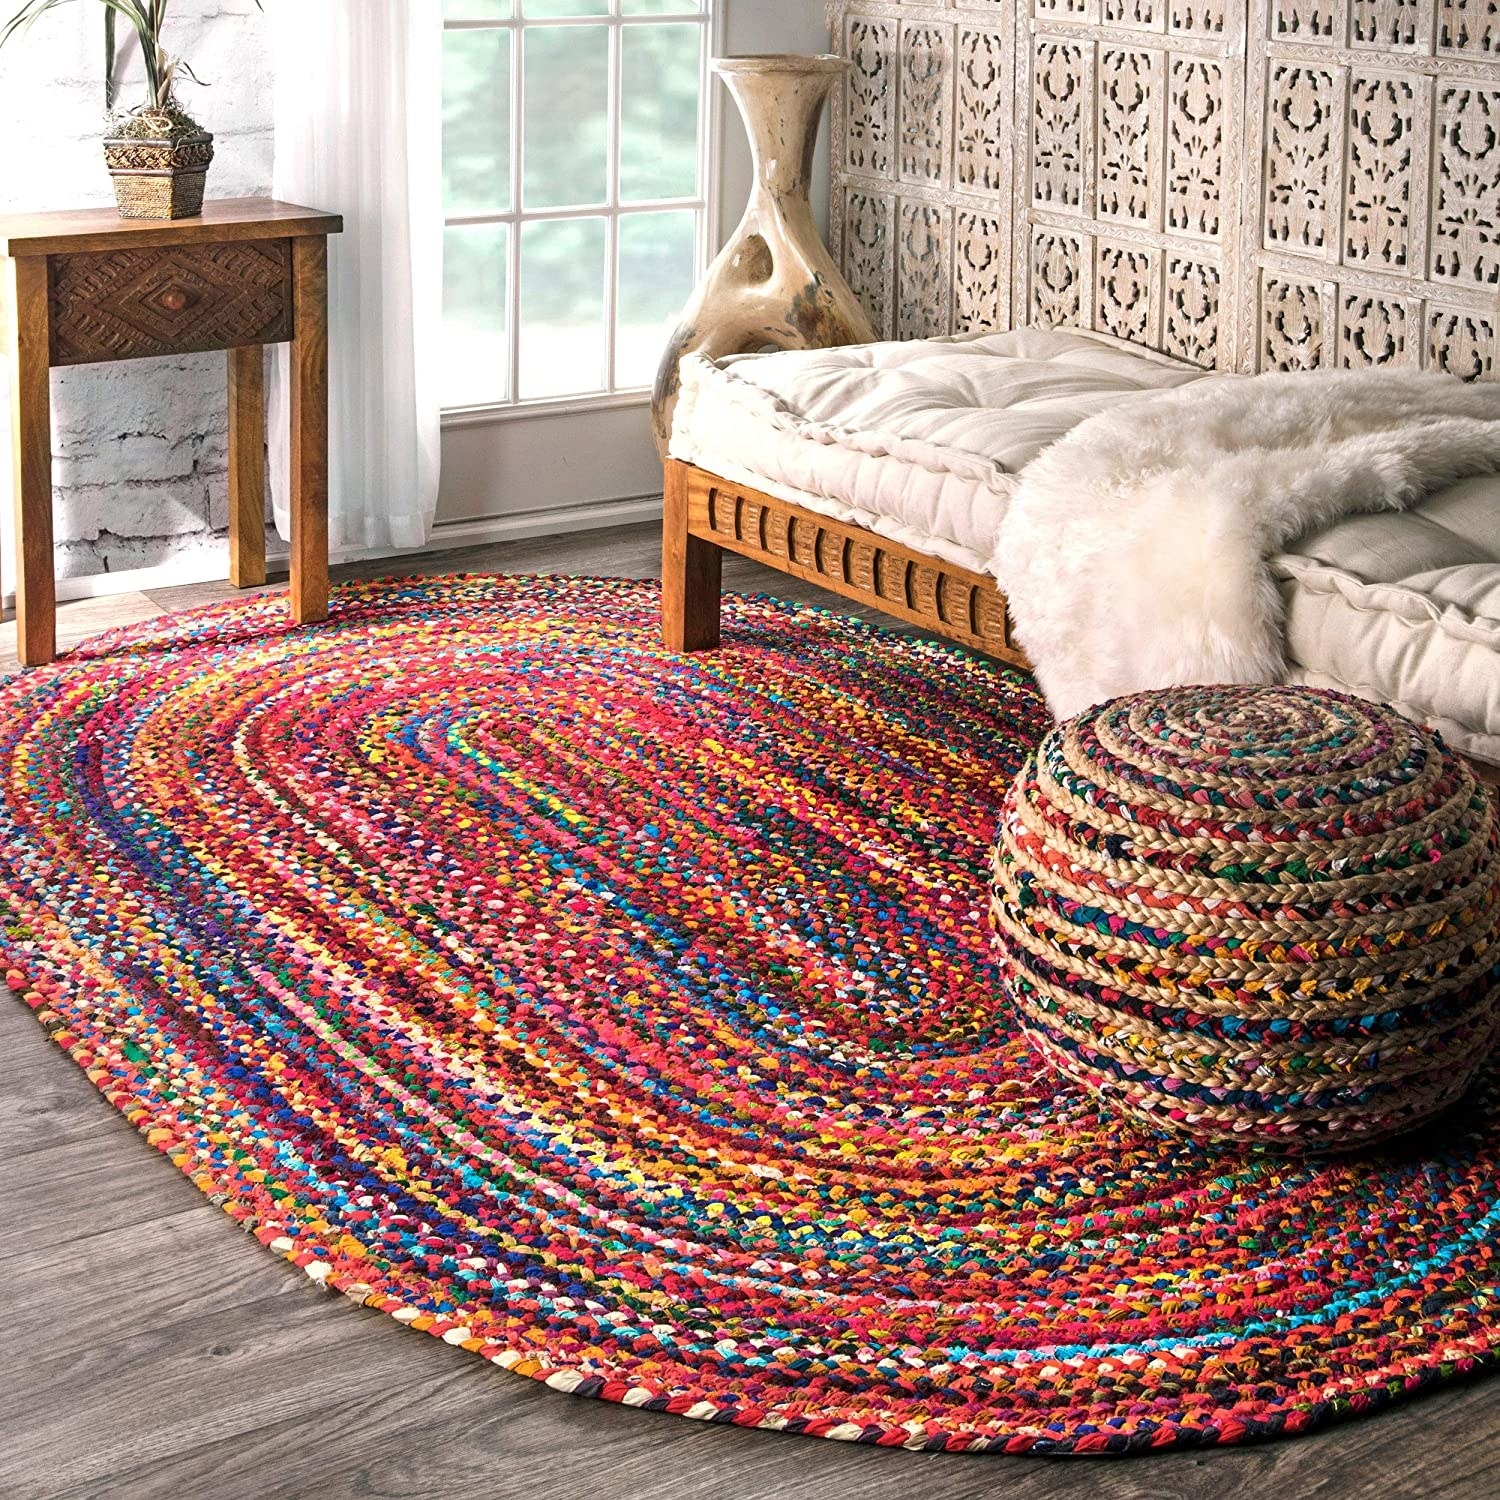 the rug in a living space under a pouf and couch